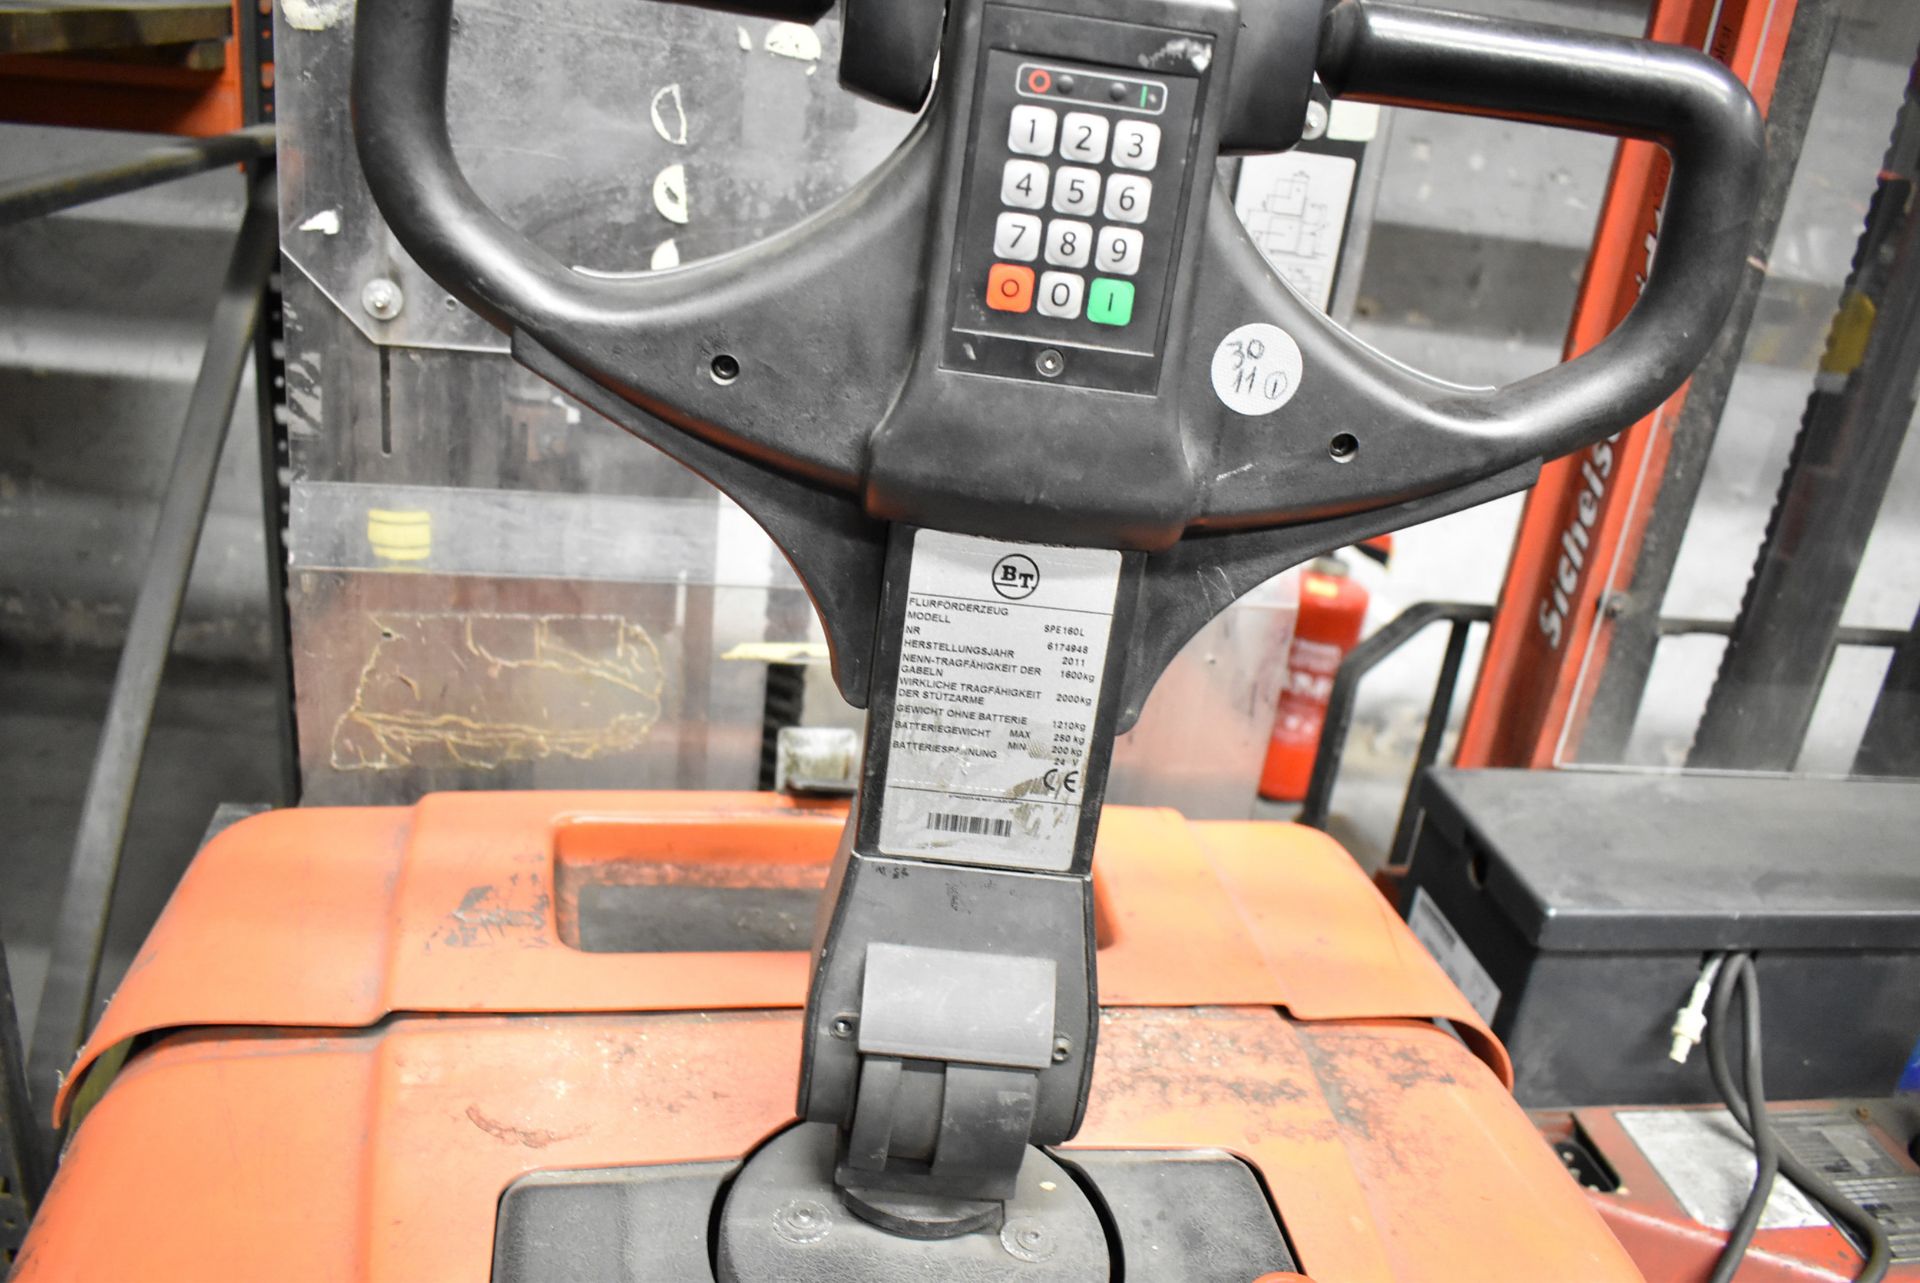 BT STAXIO (2011) SPE 160L 1600 KG CAPACITY ELECTRIC RIDE ON TYPE FORKLIFT WITH VERTICAL REACH, 2- - Image 4 of 4